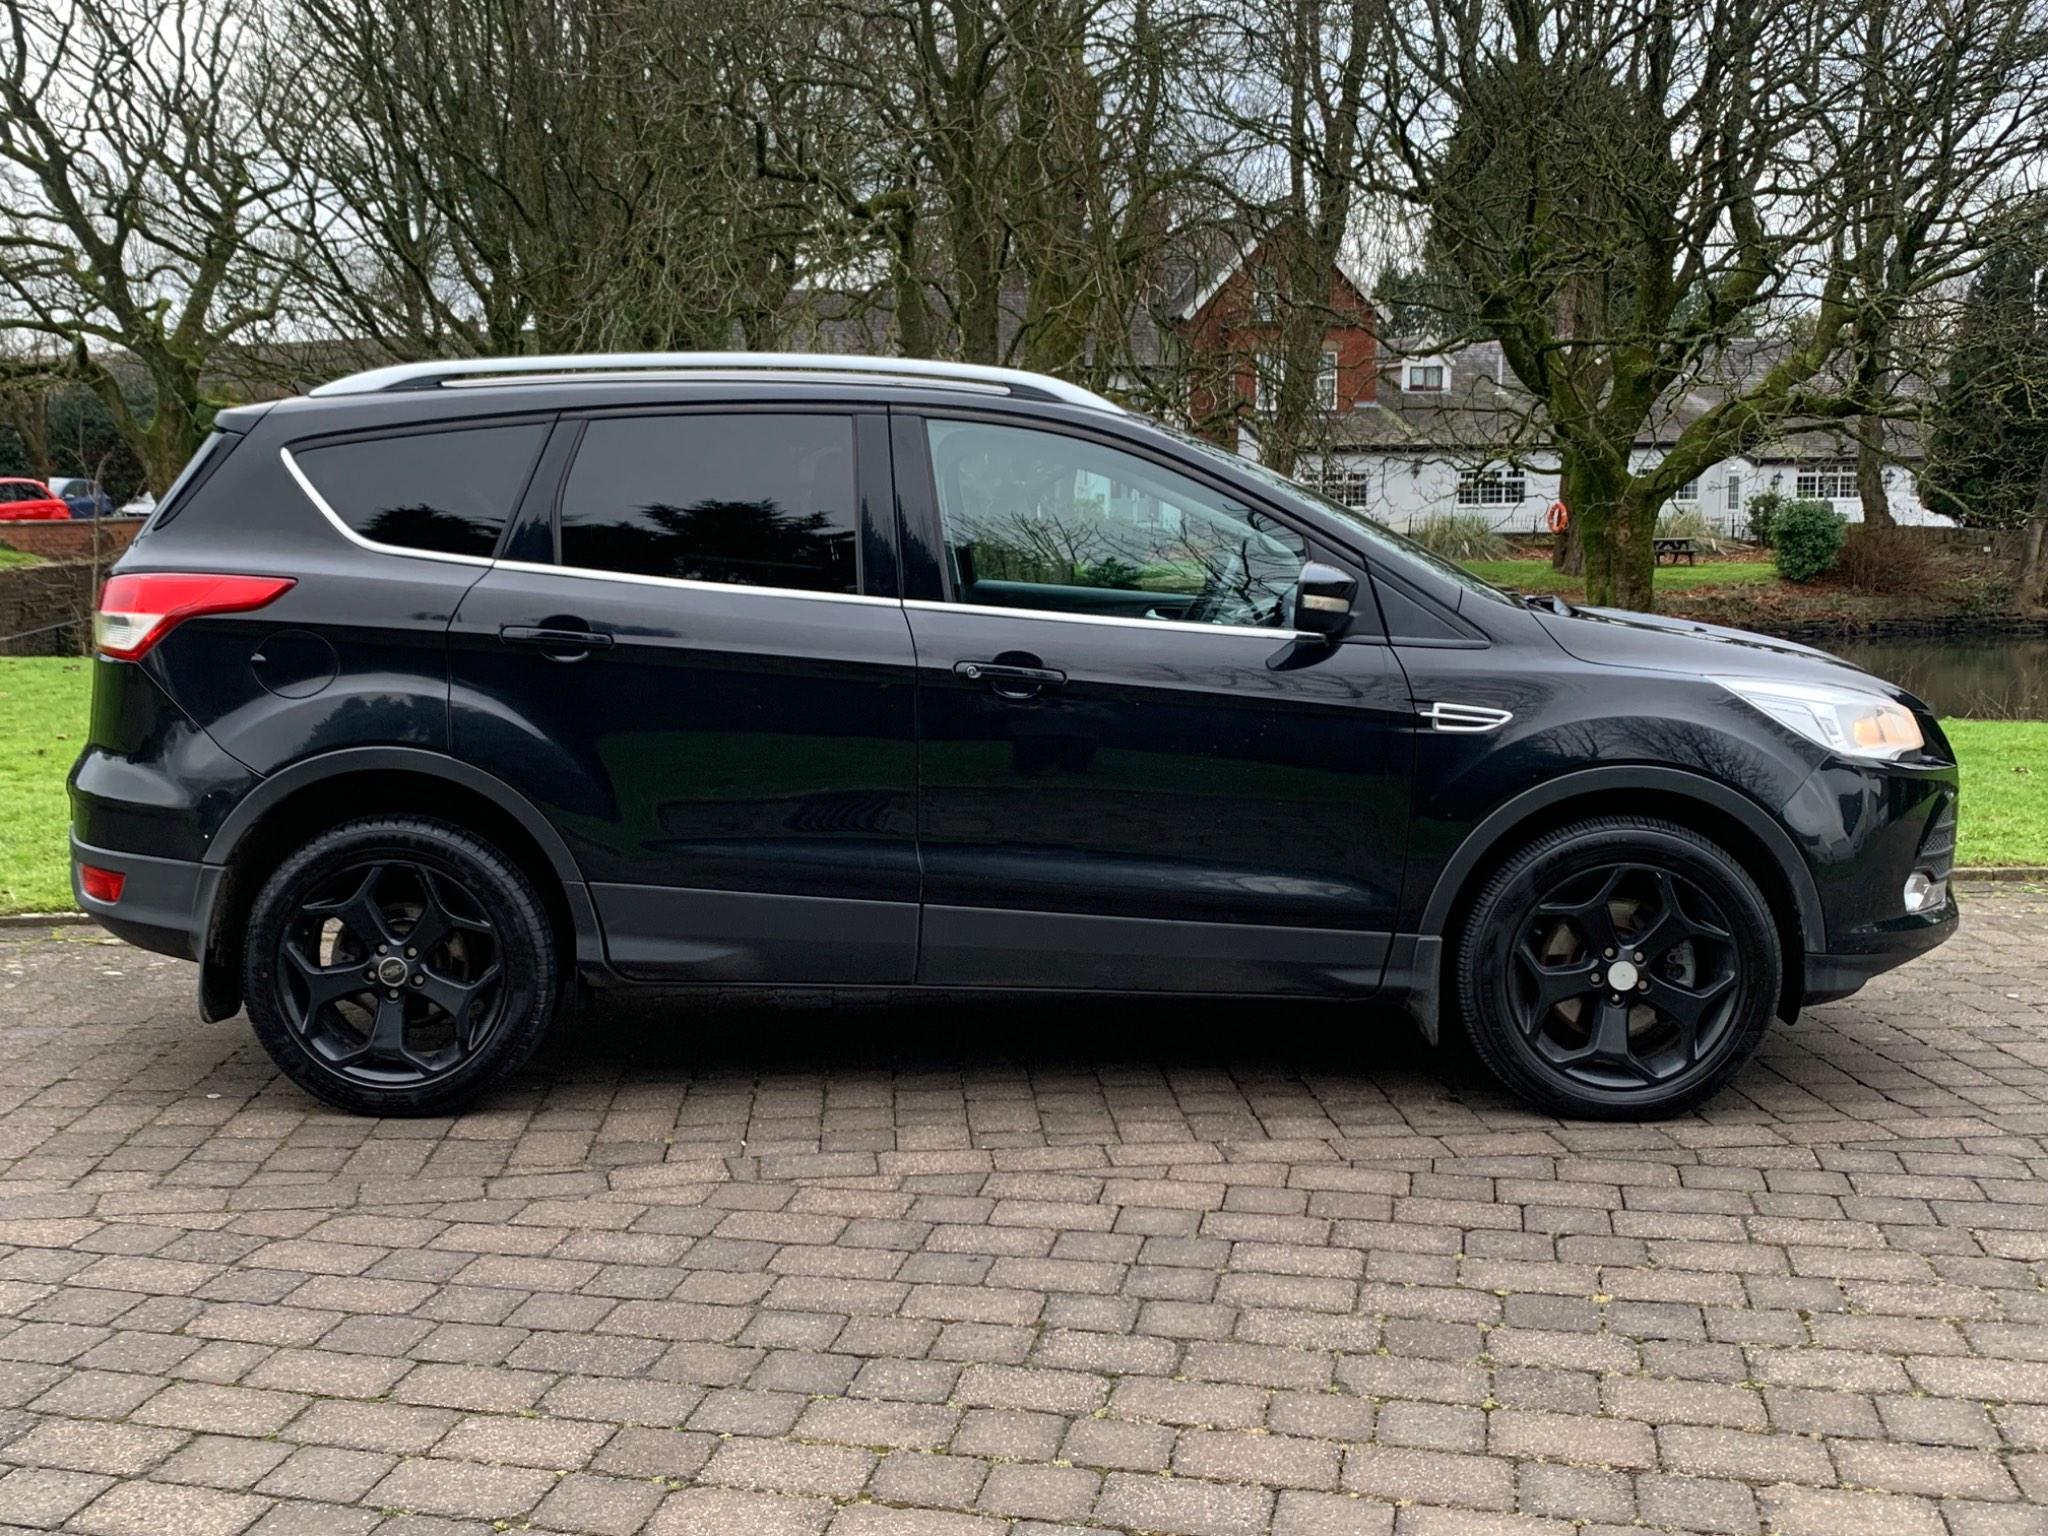 Used Ford Kuga Review - 2013-2020